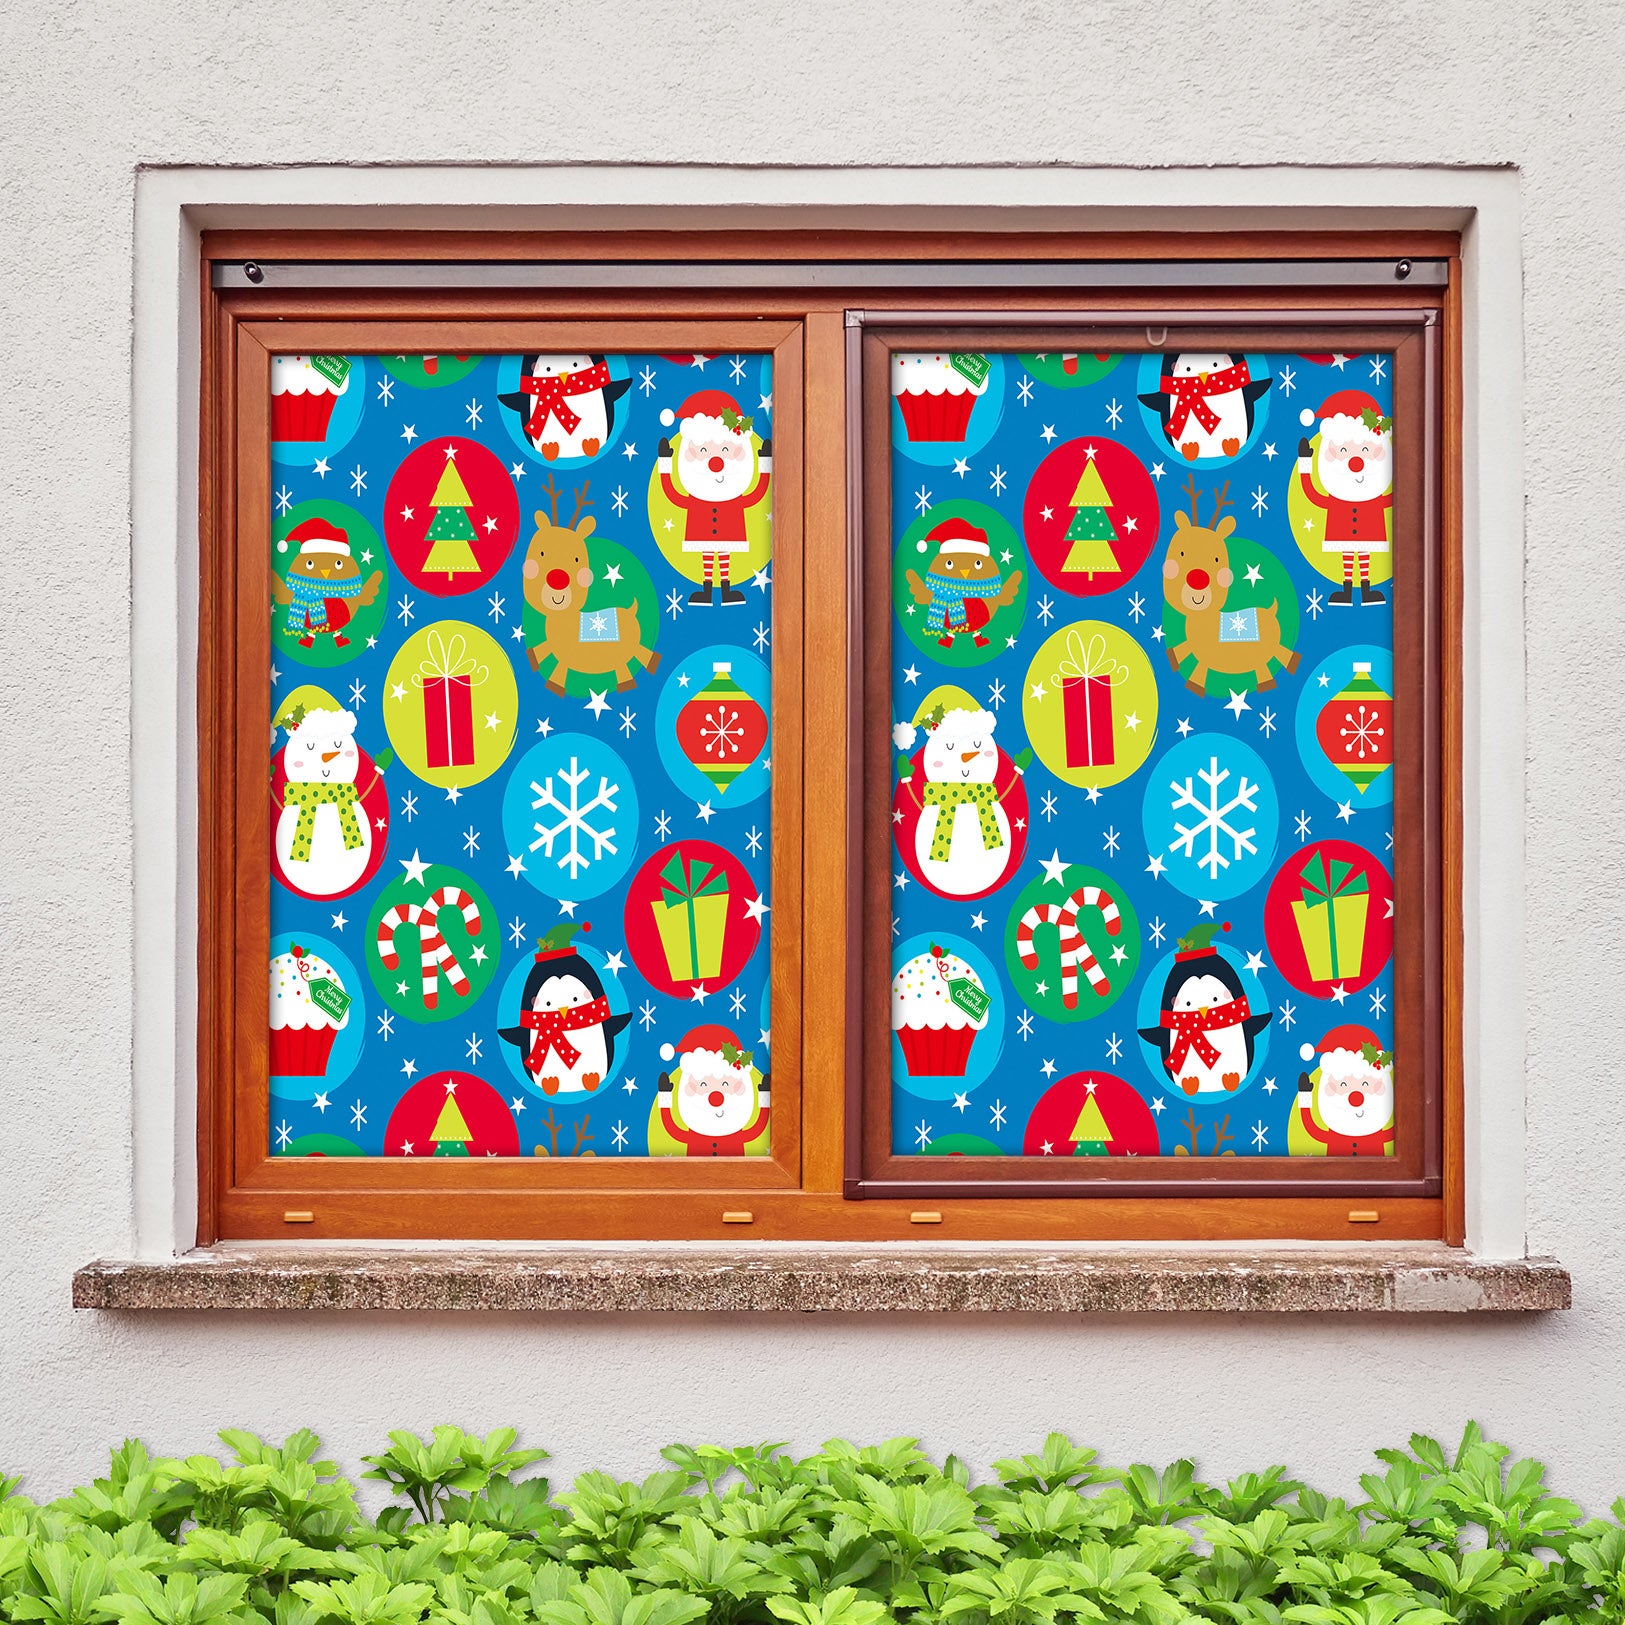 3D Snowflake Santa Claus Pattern 31085 Christmas Window Film Print Sticker Cling Stained Glass Xmas